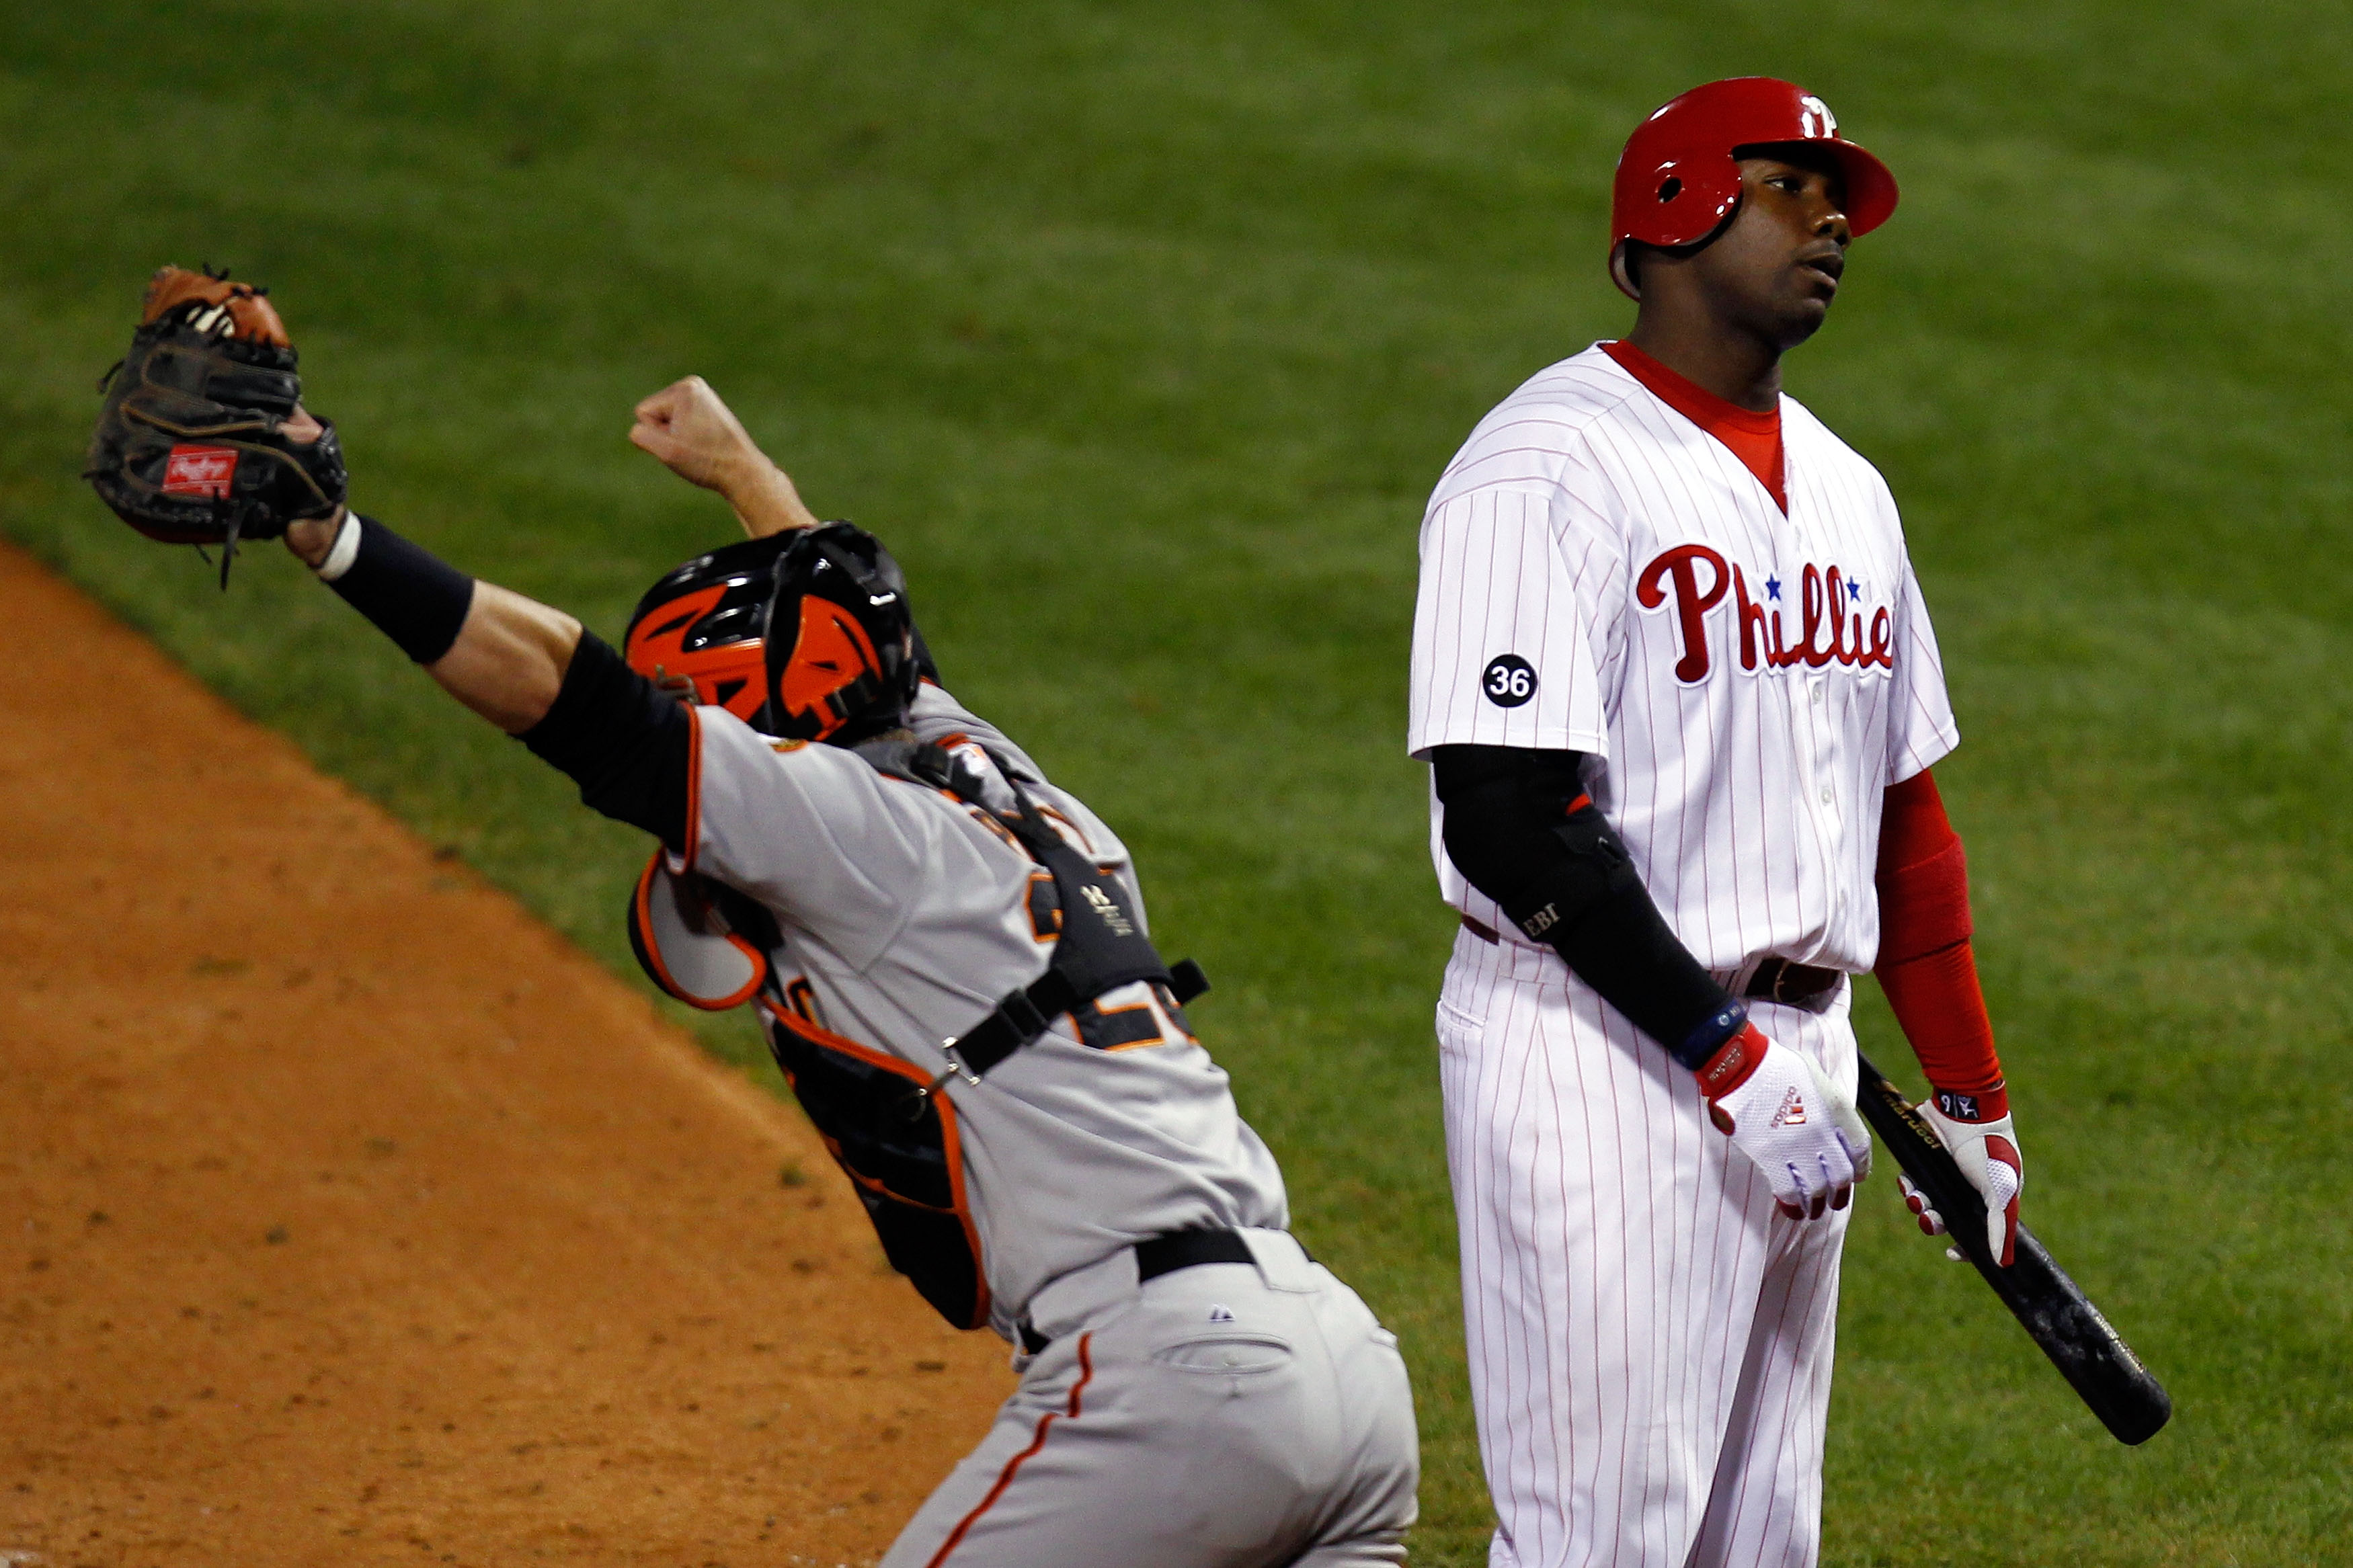 Jimmy Rollins embraces chance with Giants